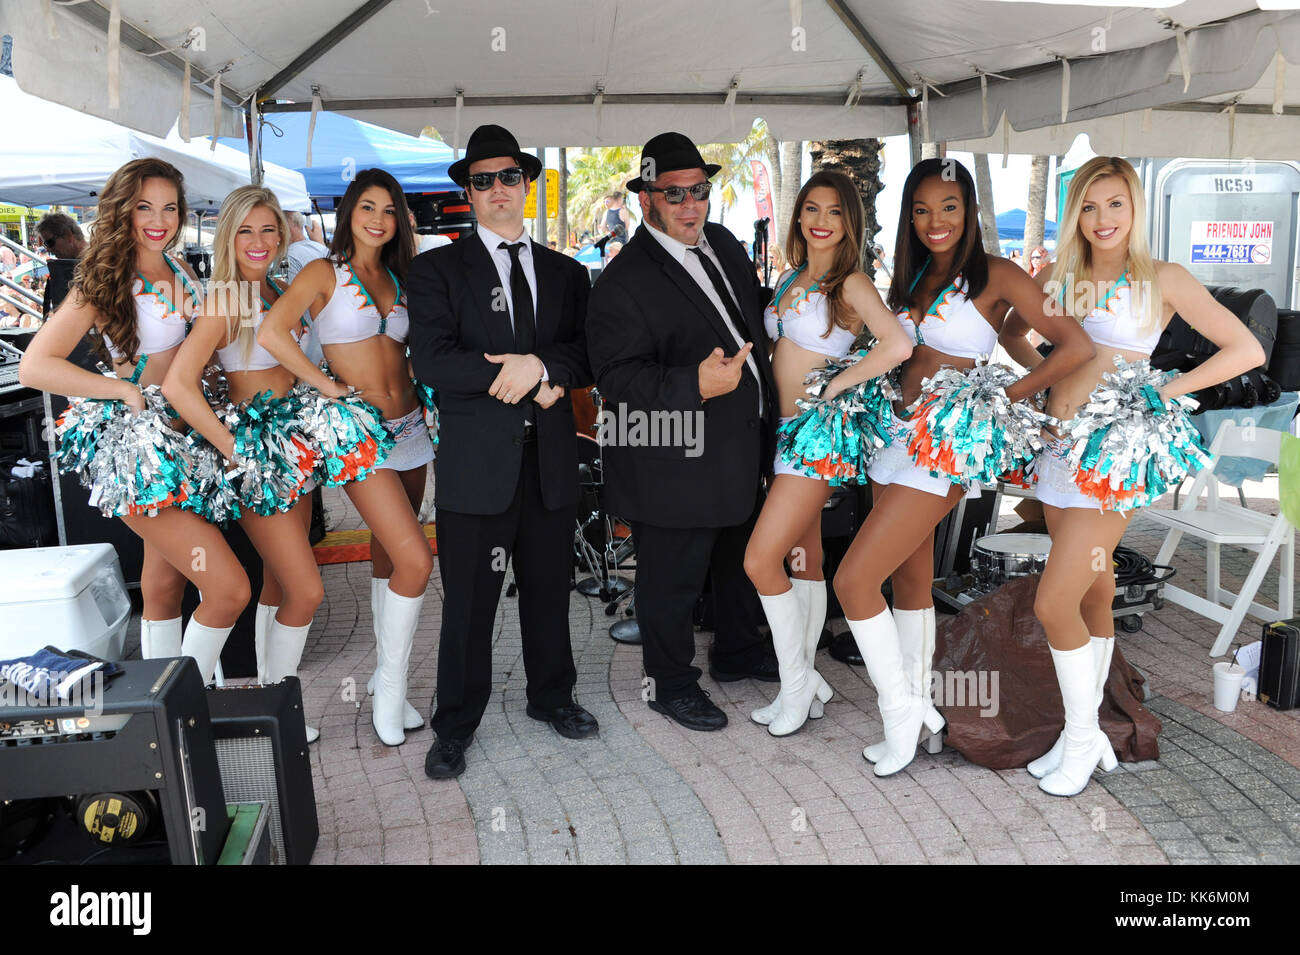 FORT LAUDERDALE, FL - MAY 28: Andrew Copeland, Ken Block, and Ryan Newell of Sister Hazel perform at the Great American Beach Party on May 28, 2016 in Fort Lauderdale, Florida.    People:  Miami Dolphin Cheerleaders, Blues Brothers Stock Photo